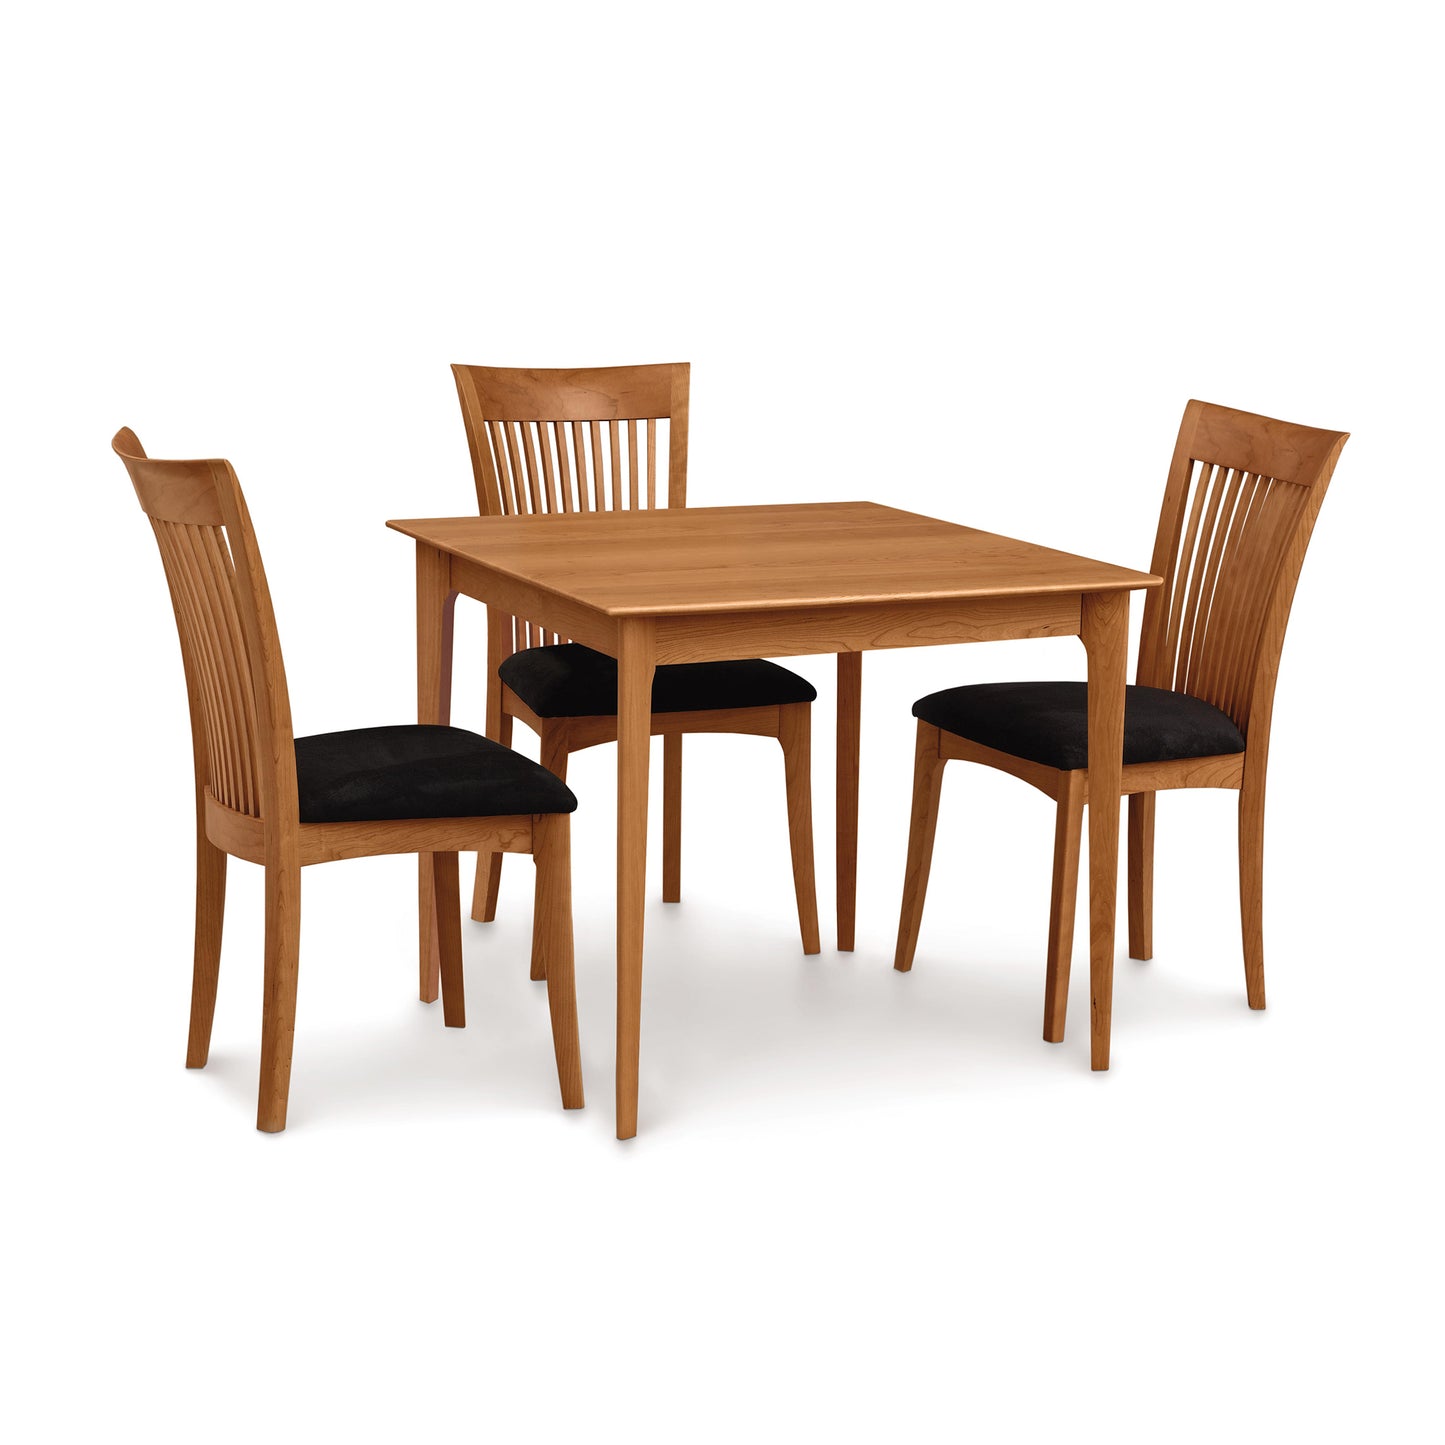 A Sarah Shaker Tapered Leg Solid Top Table from Copeland Furniture with four matching chairs, each with black cushions, isolated on a white background.